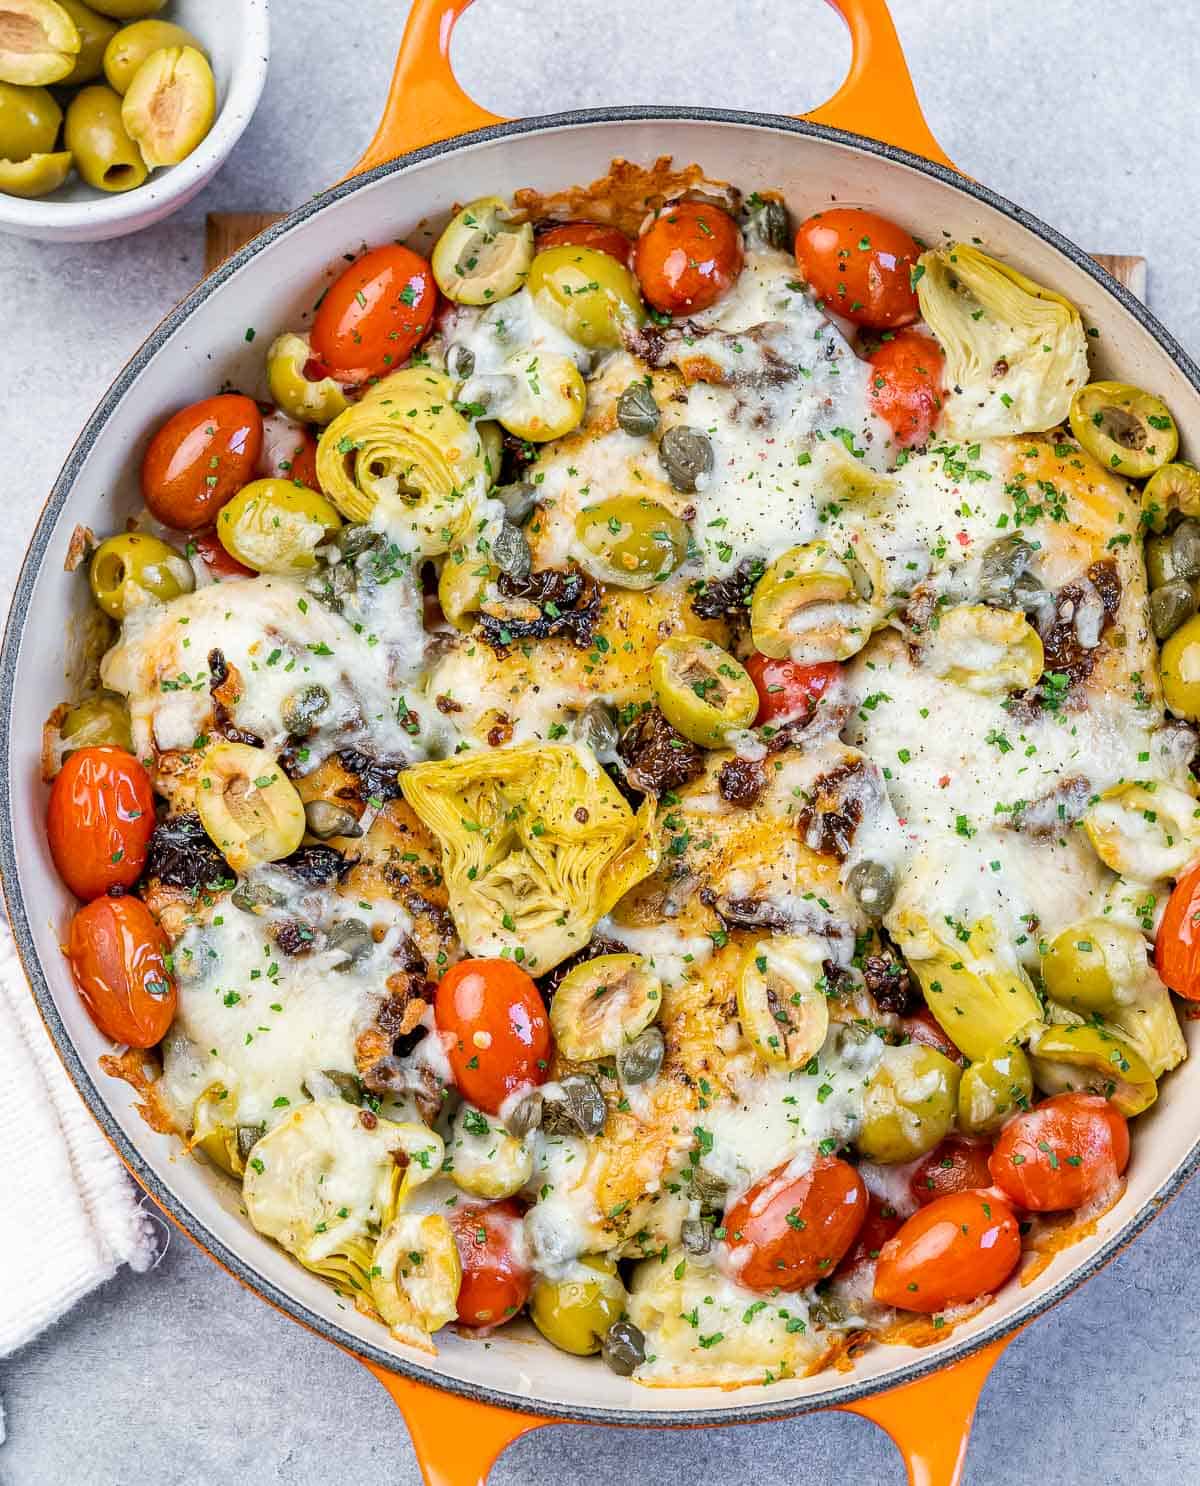 Baked Italian chicken in a skillet with tomatoes, olives, artichokes, capers and cheese.